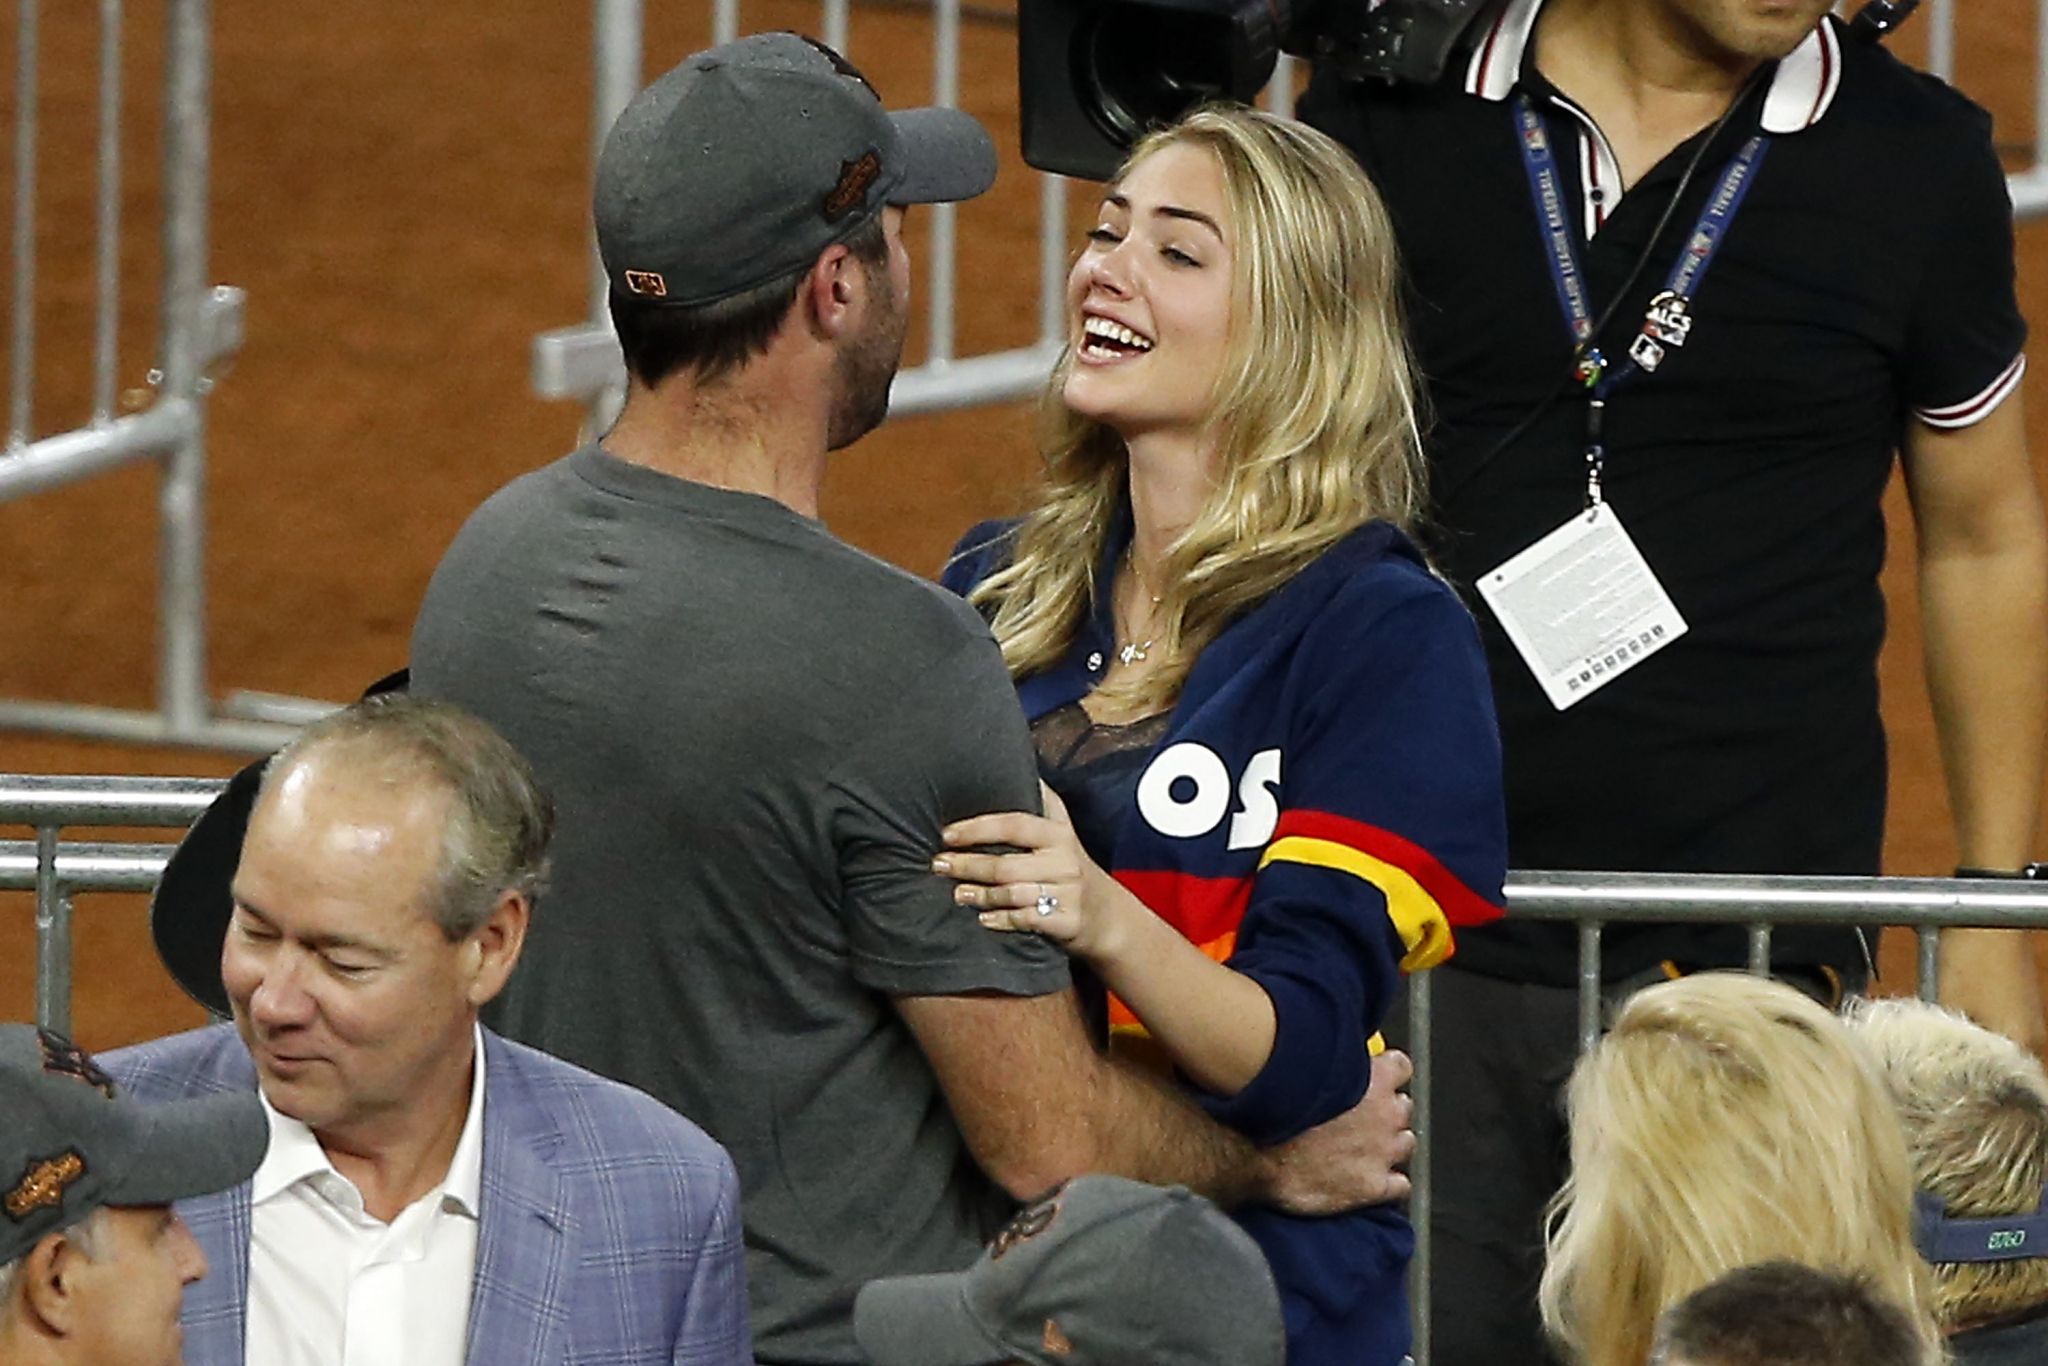 Astros sweater made famous by Kate Upton is back in stock